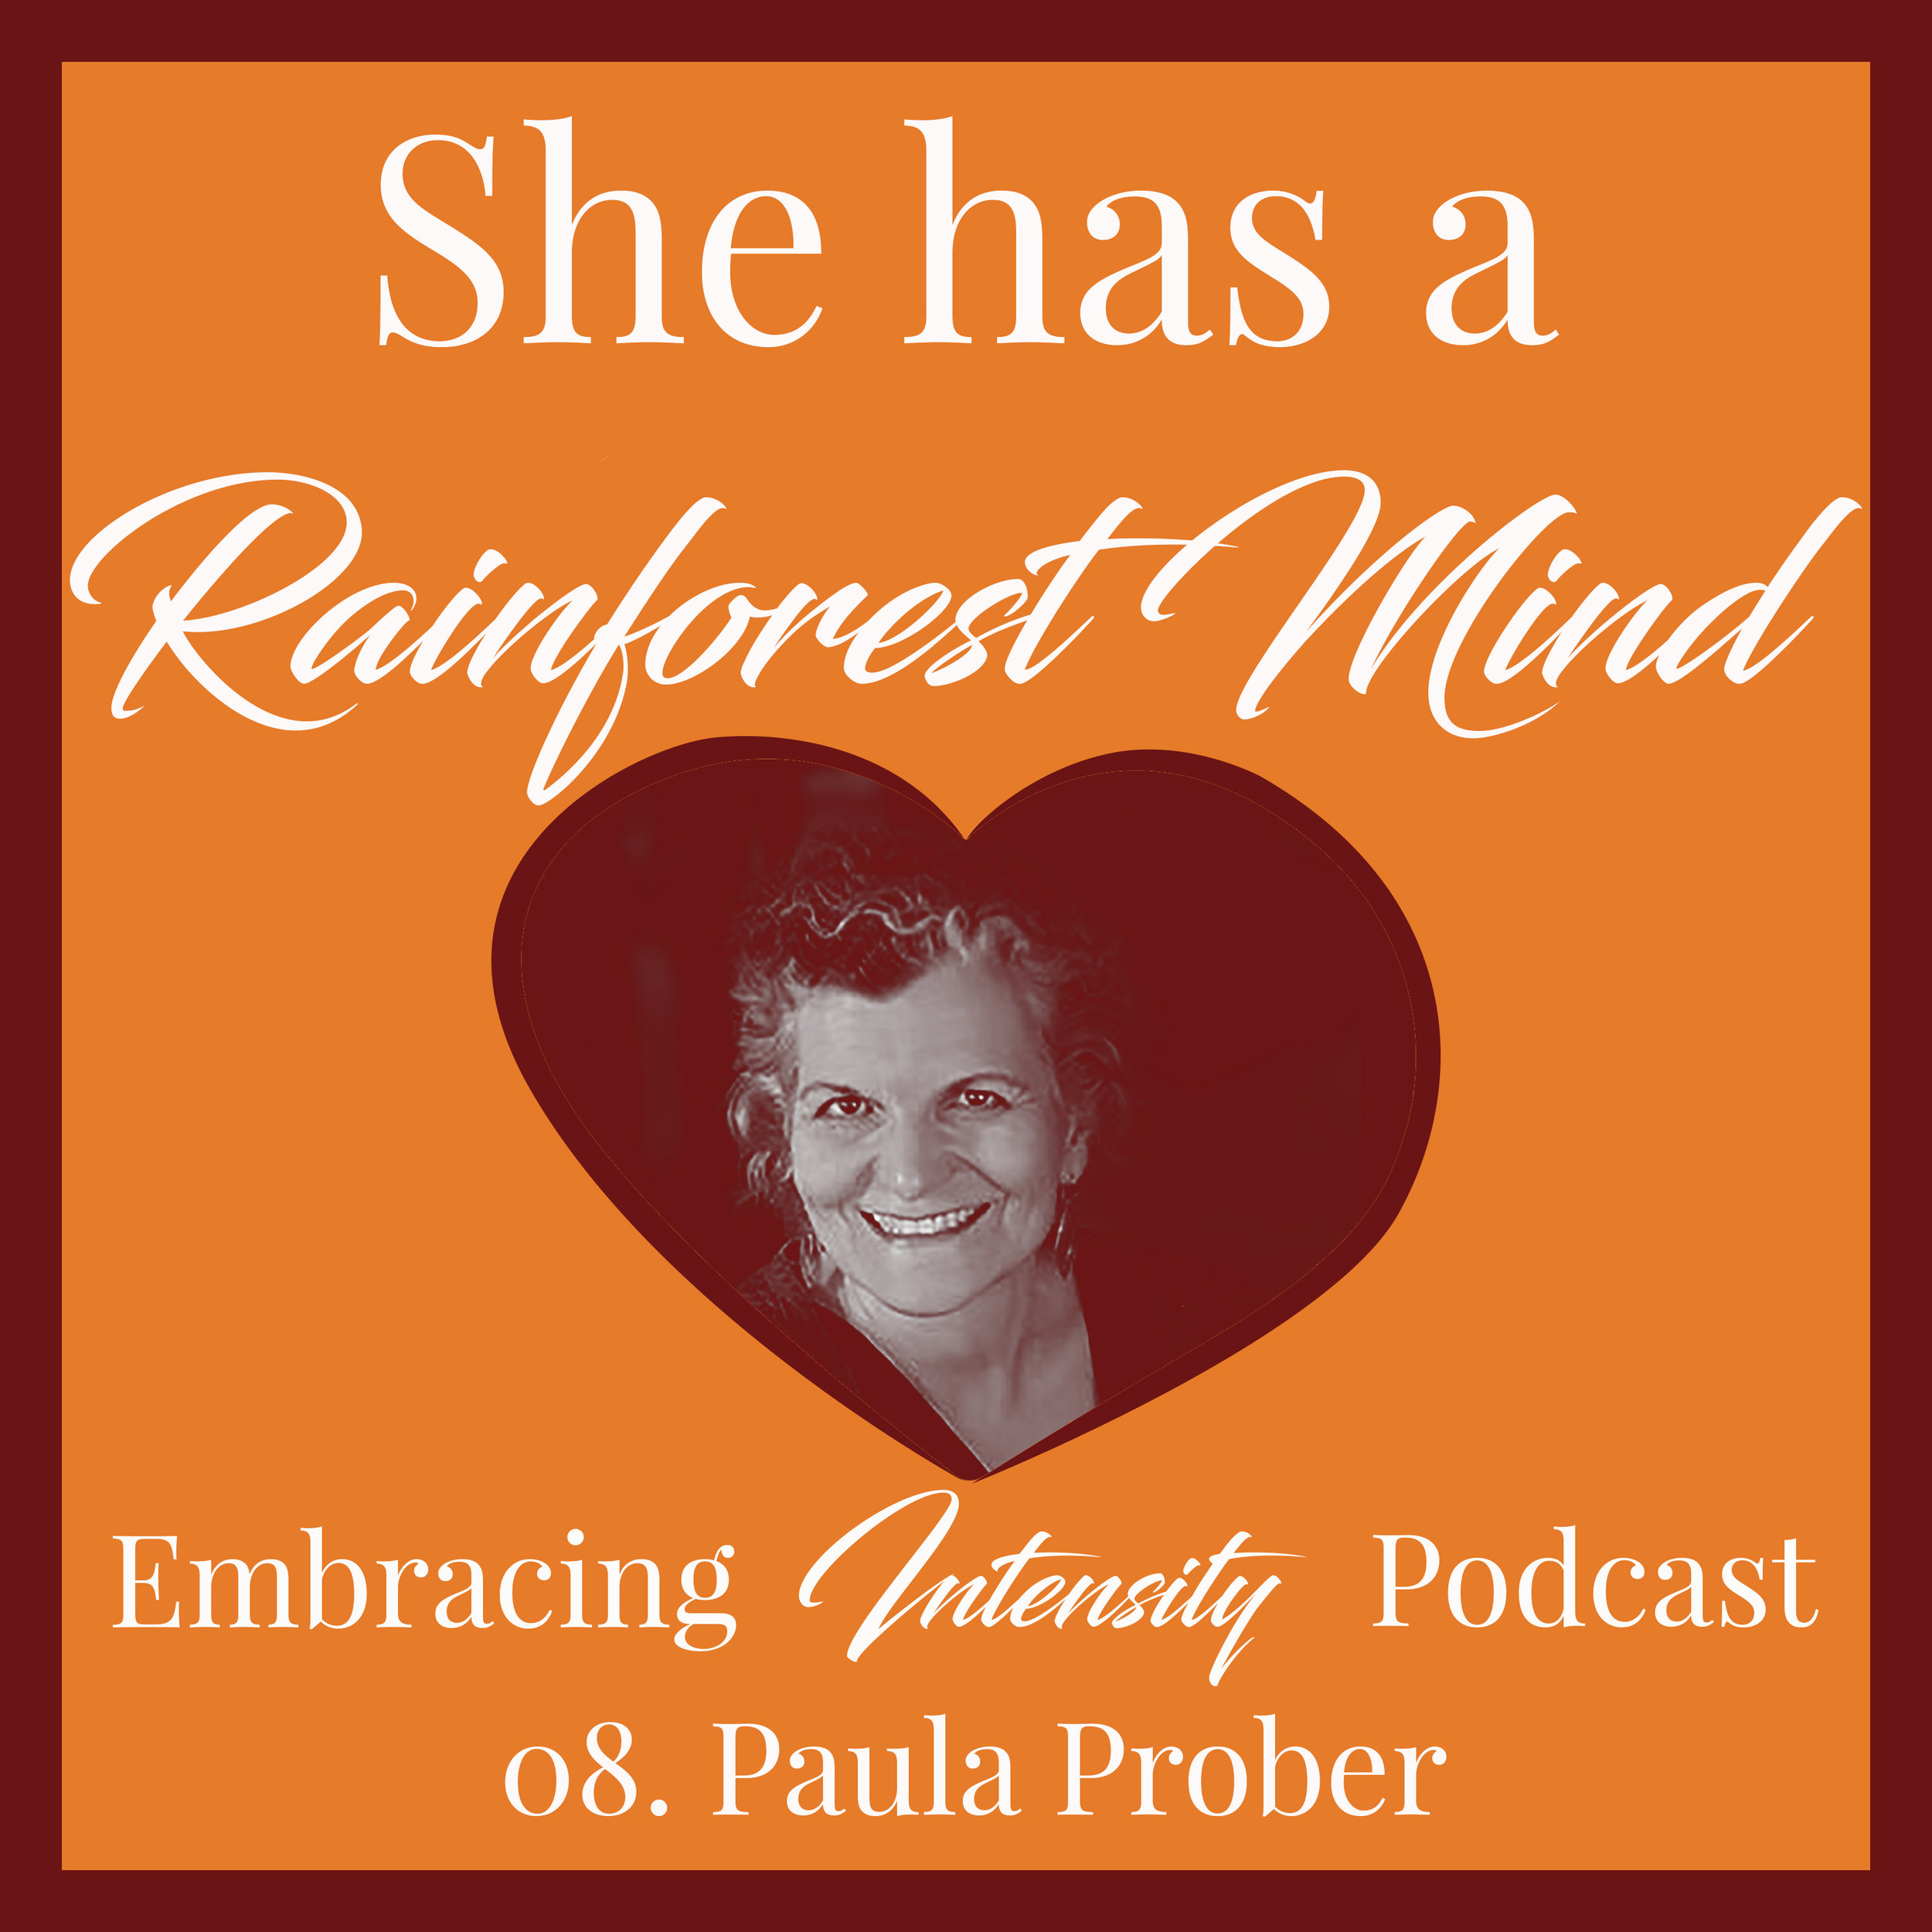 Healing for the Gifted Adult with Paula Prober on Embracing Intensity Podcast ep. 08